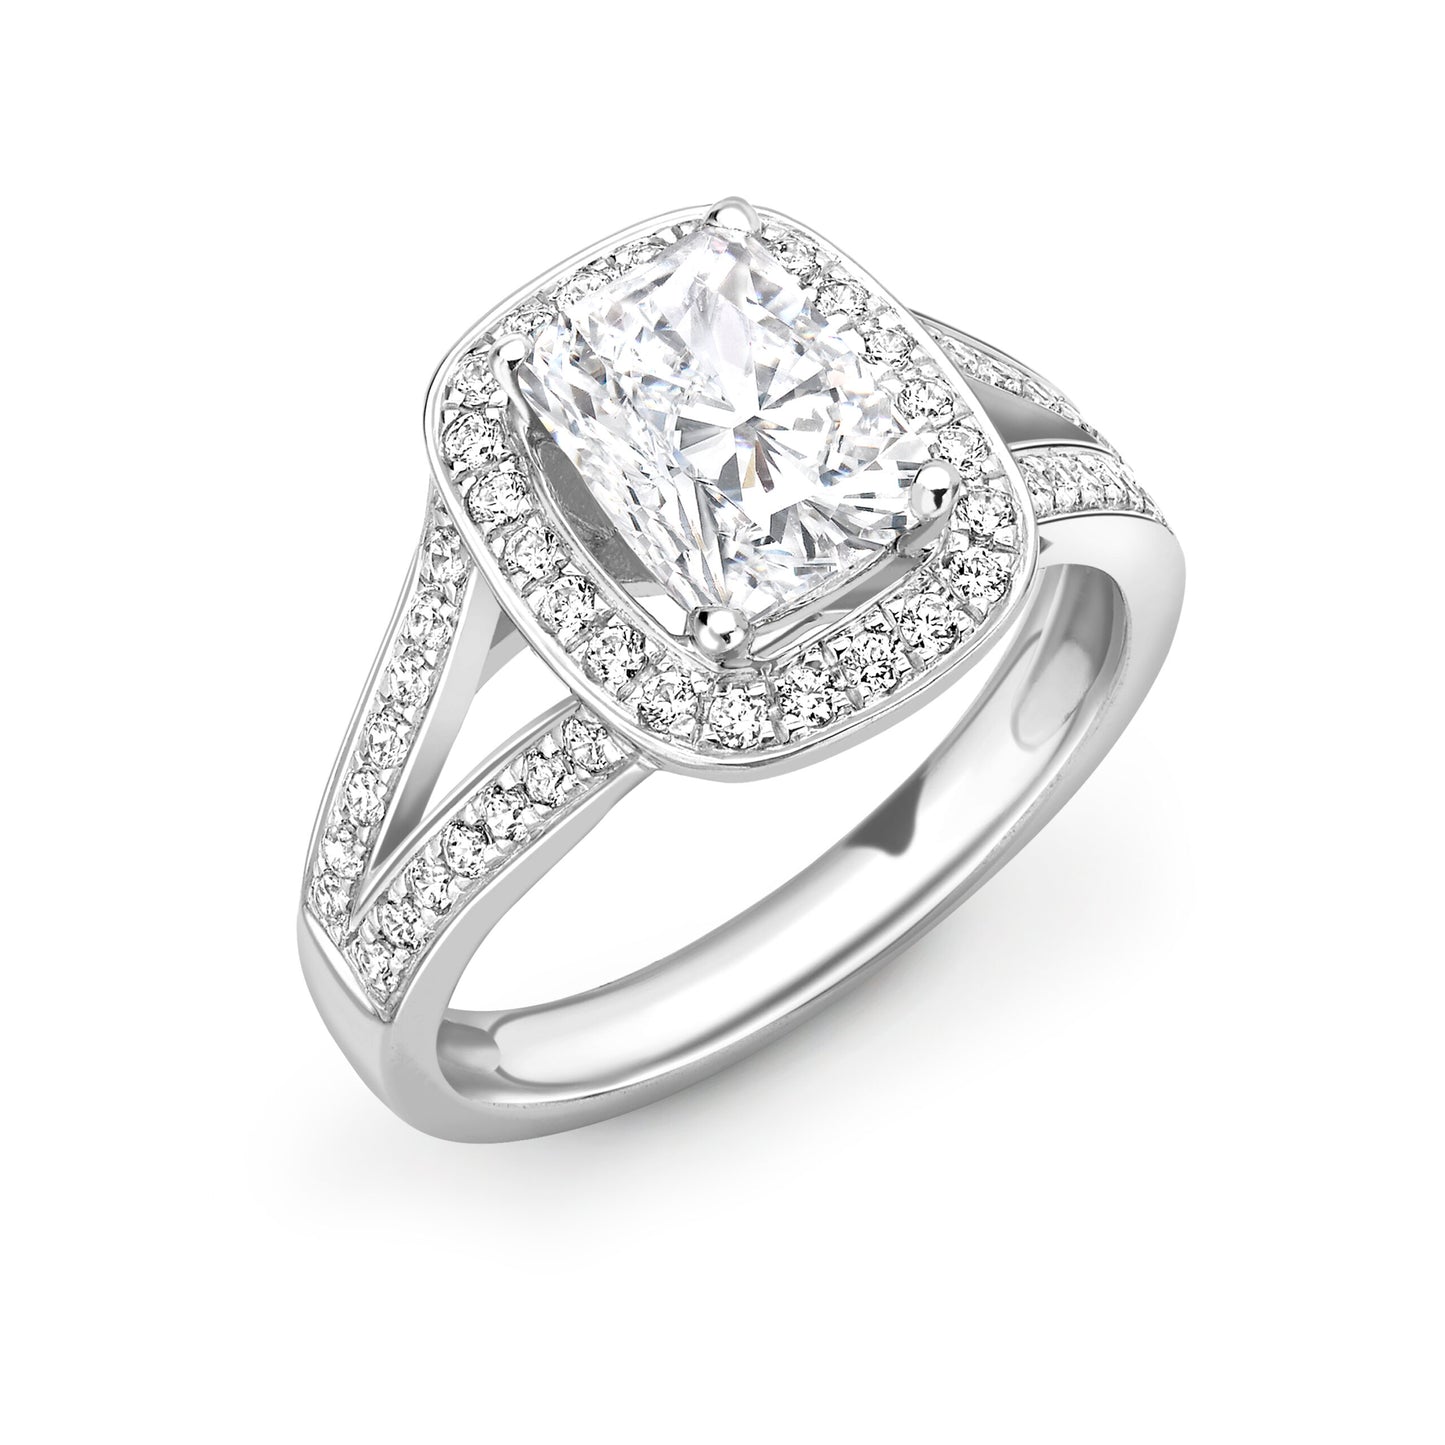 Radiant Cut Diamond Ring with Split Shoulders and Halo